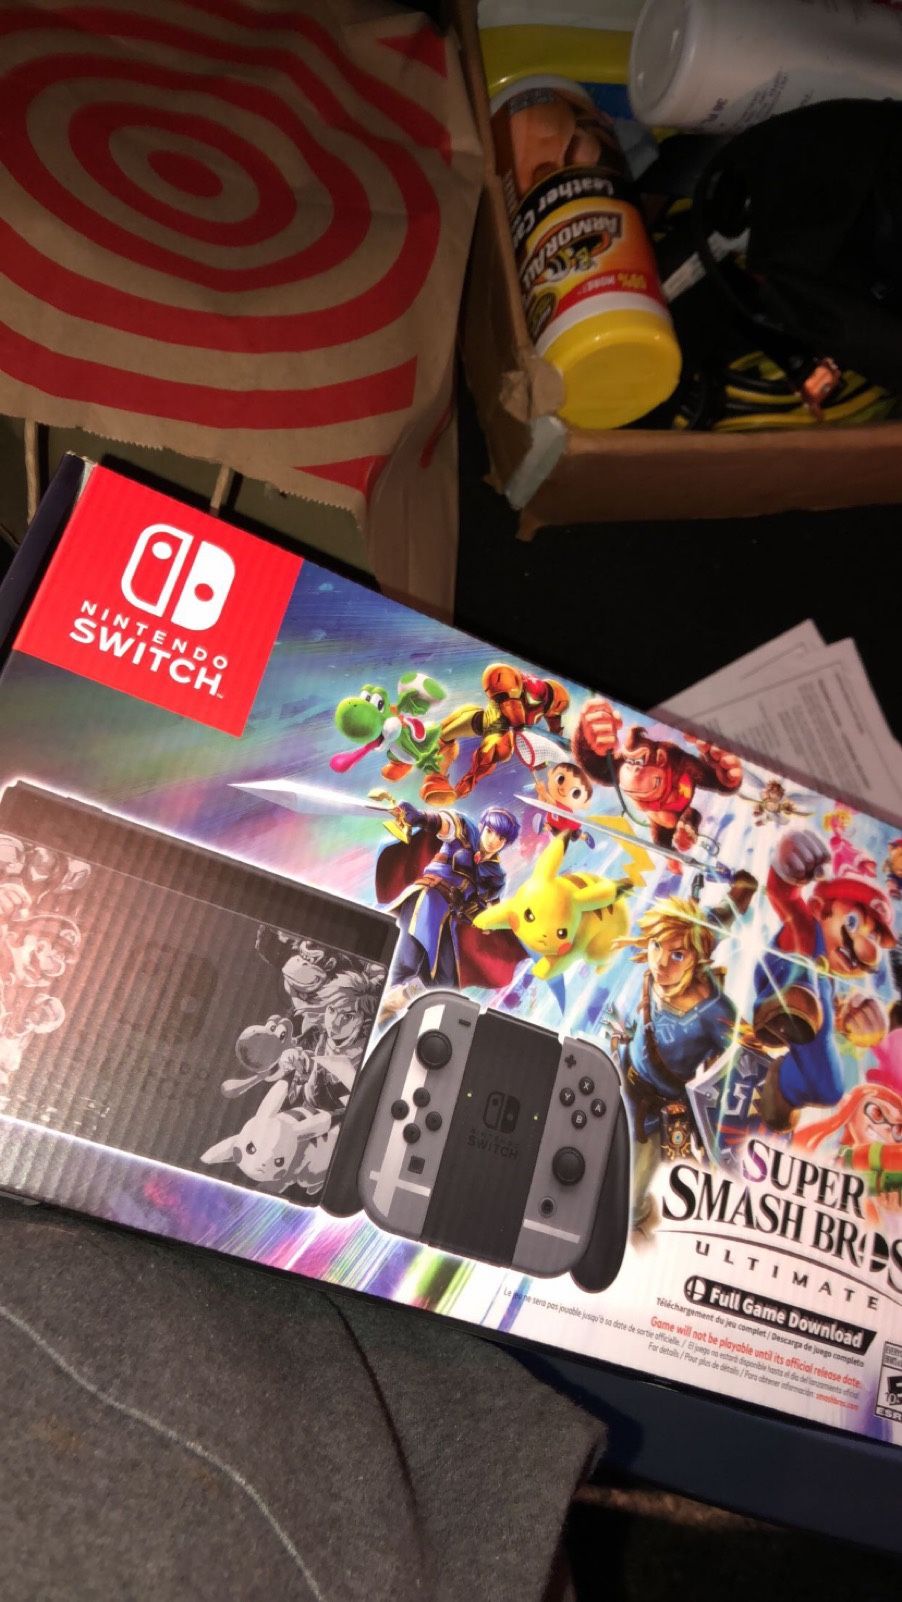 Super smash brothers ultimate Nintendo switch